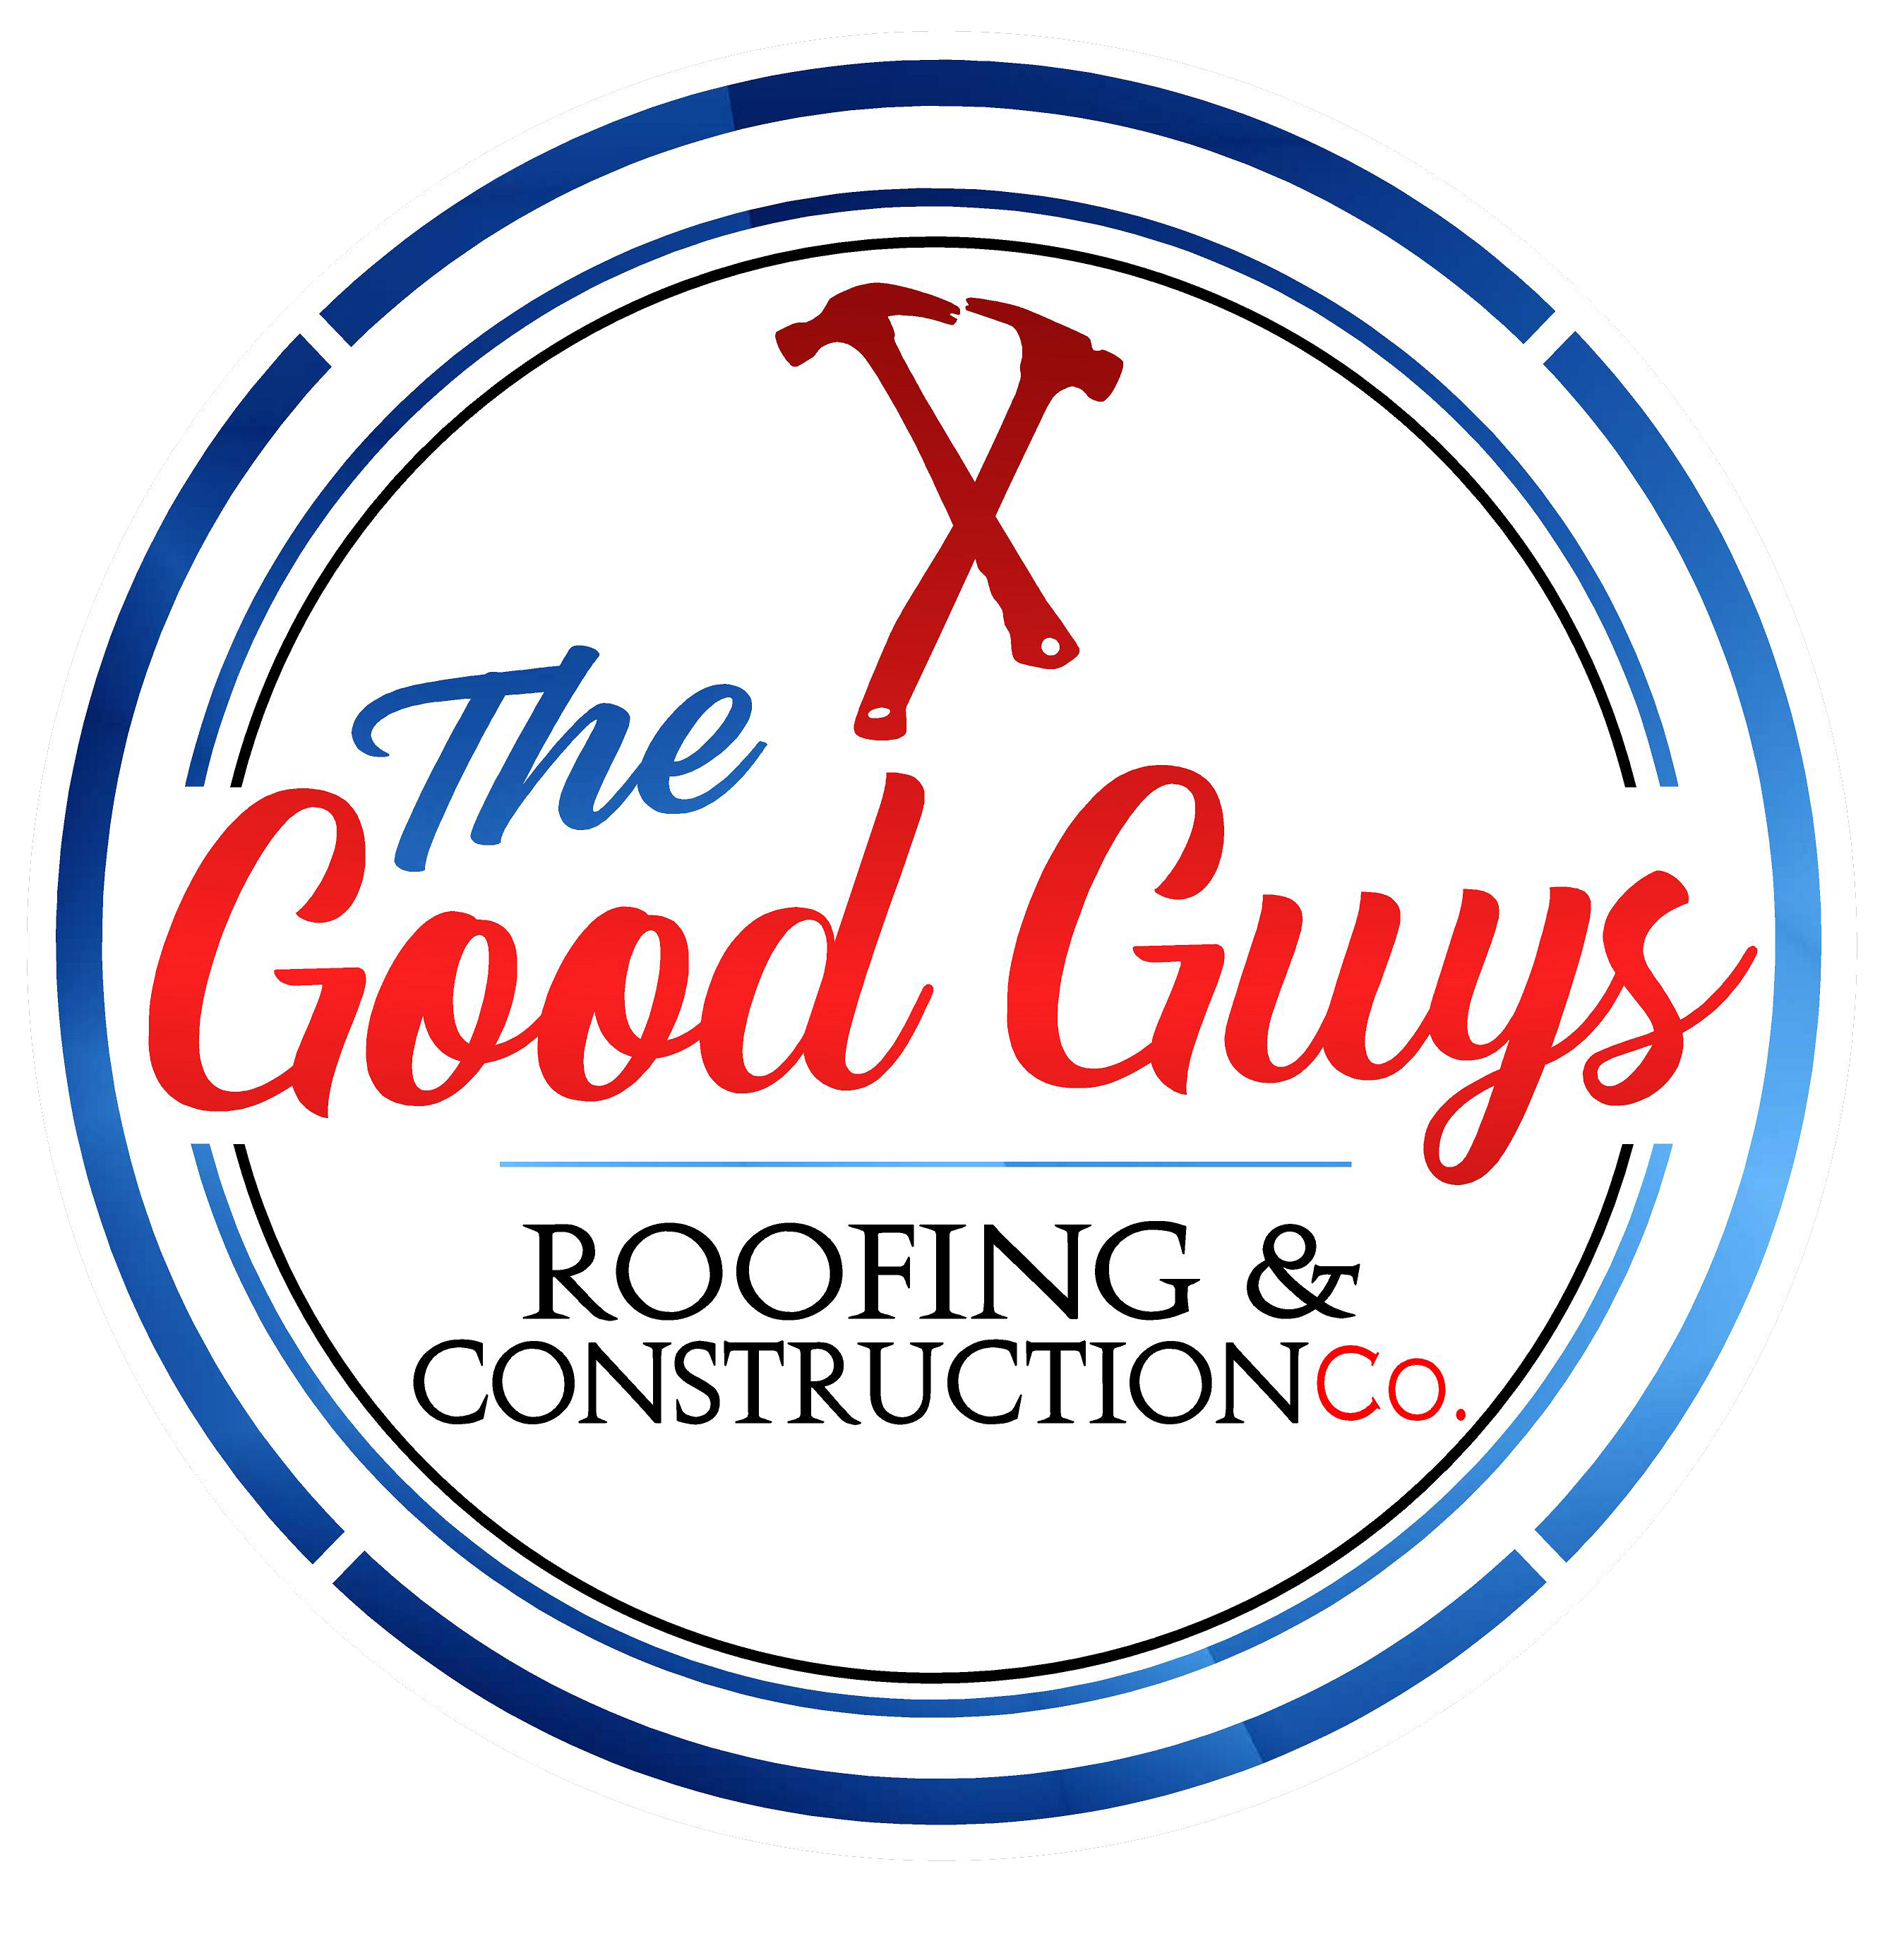 The Good Guys Roofing and Construction CO logo